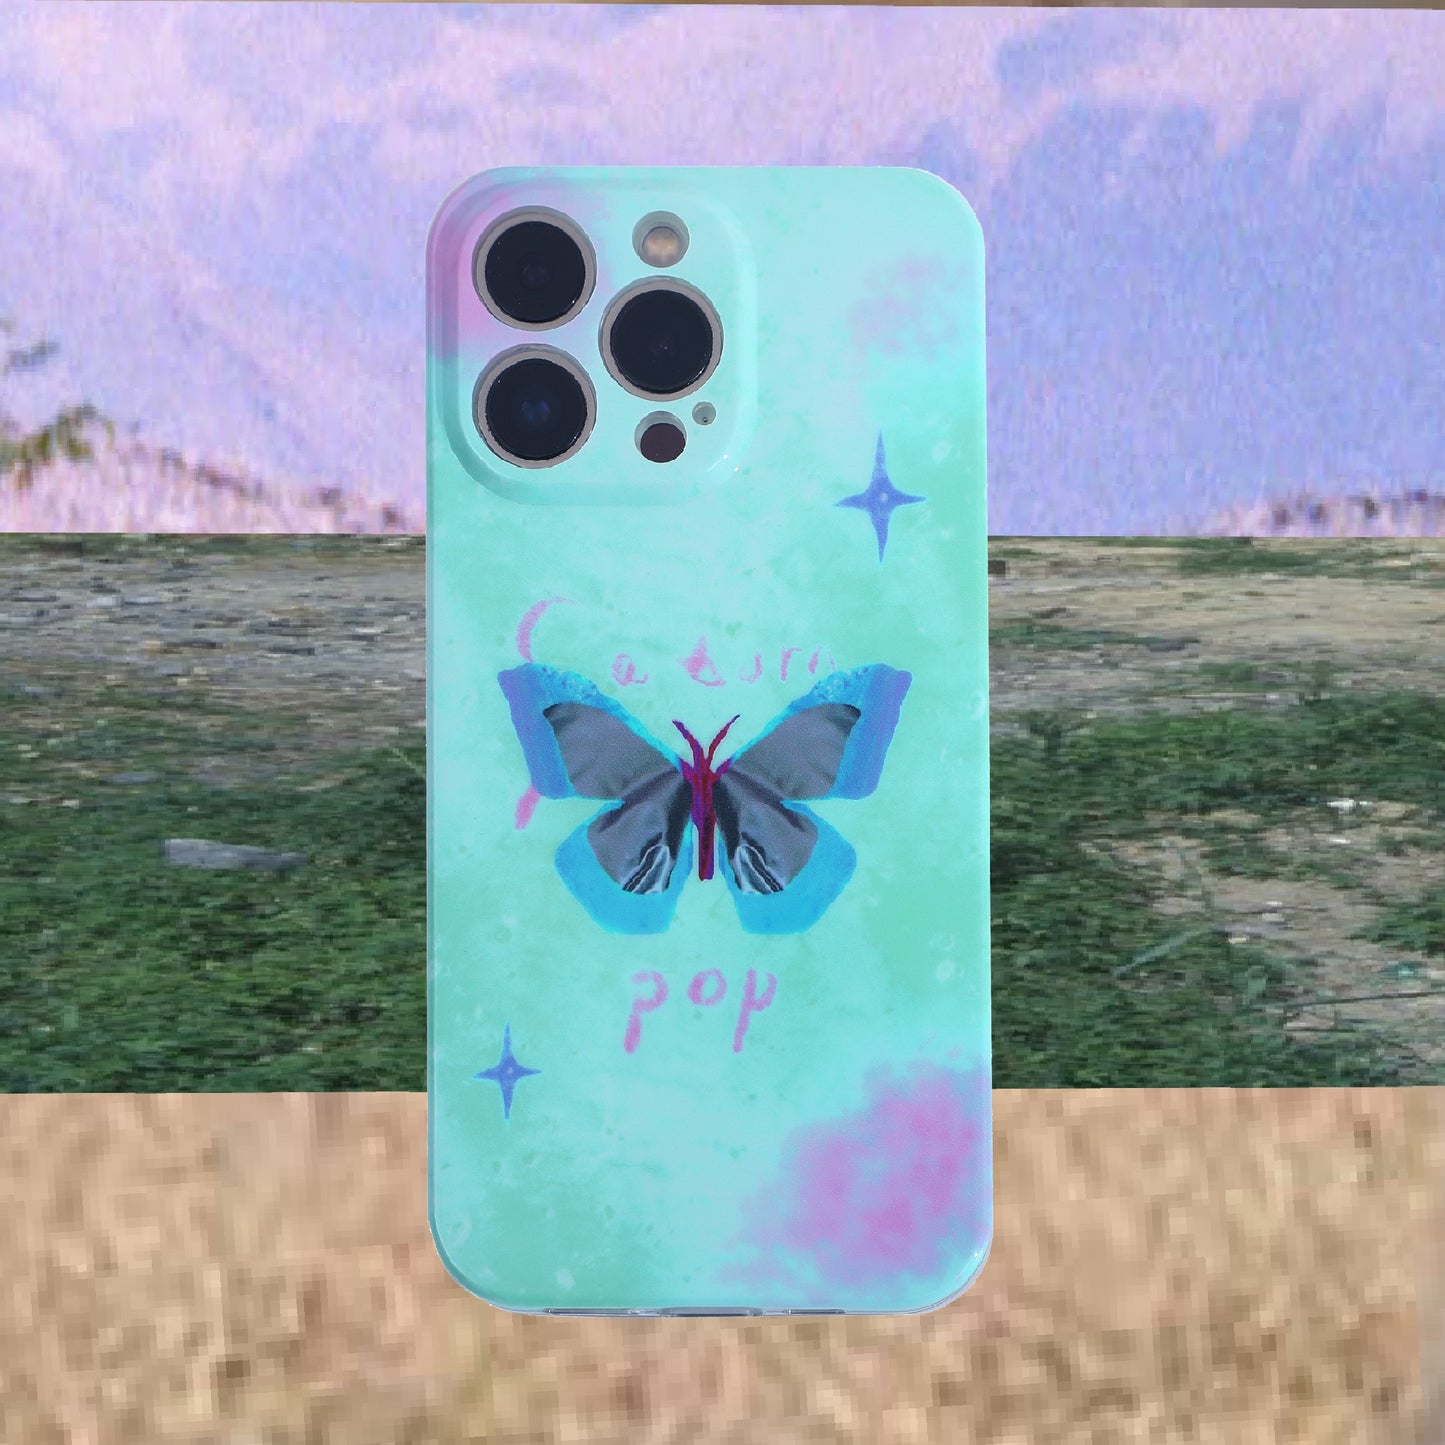 「Original」Blooming  blue butterfly IMD phone case